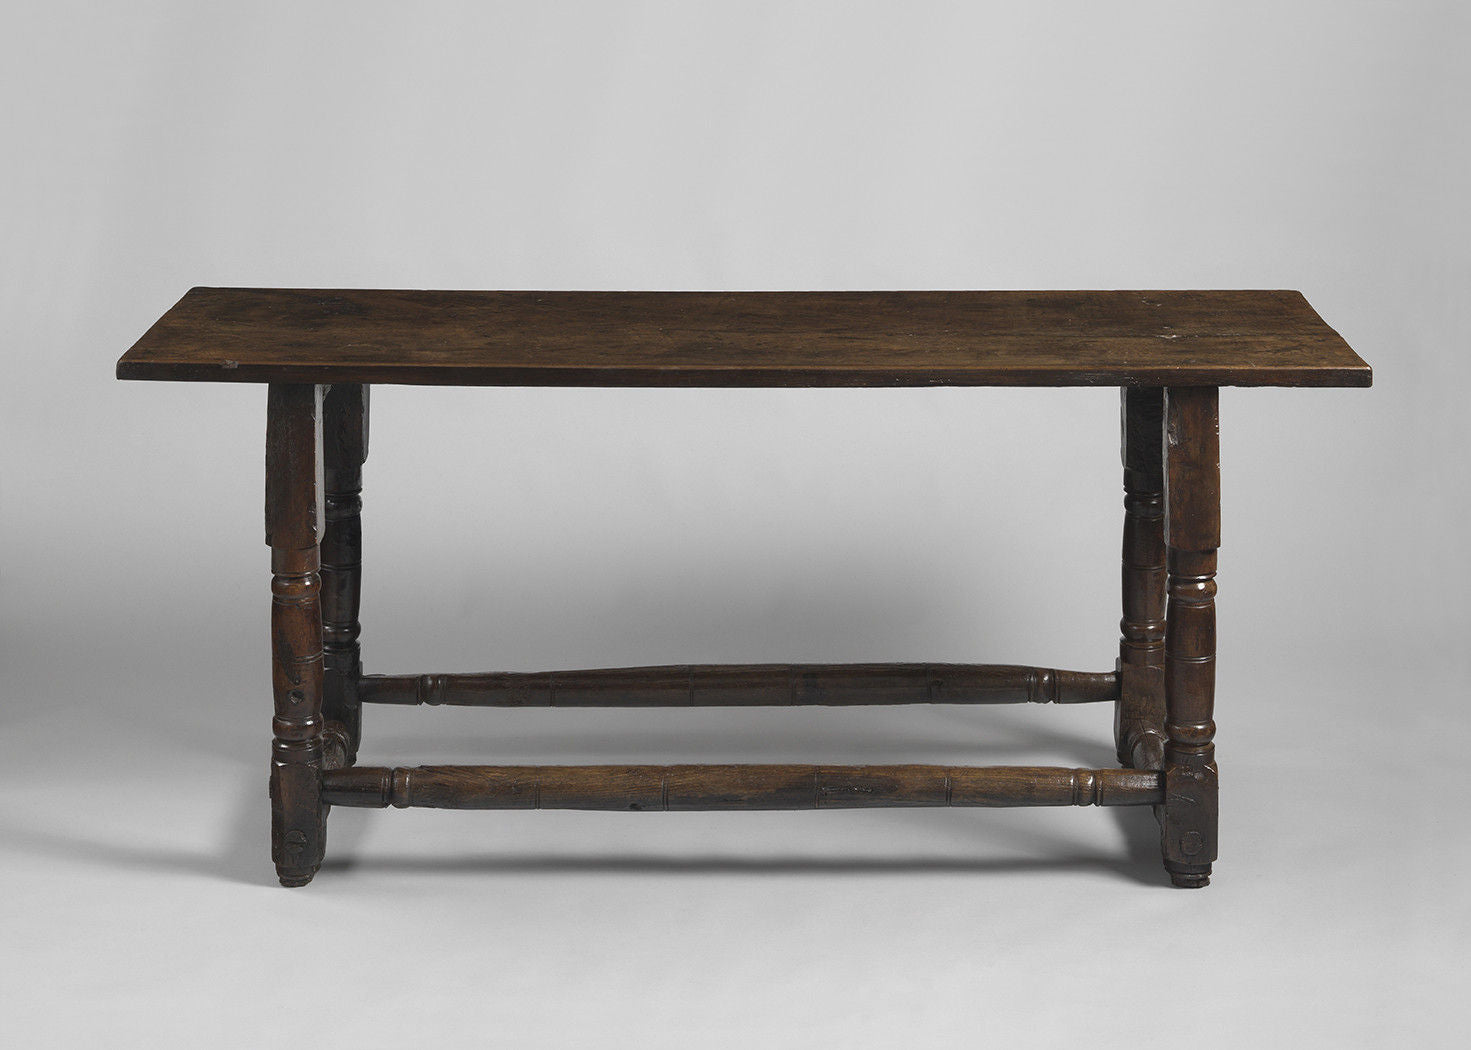 Unusual Early Turner’s Table